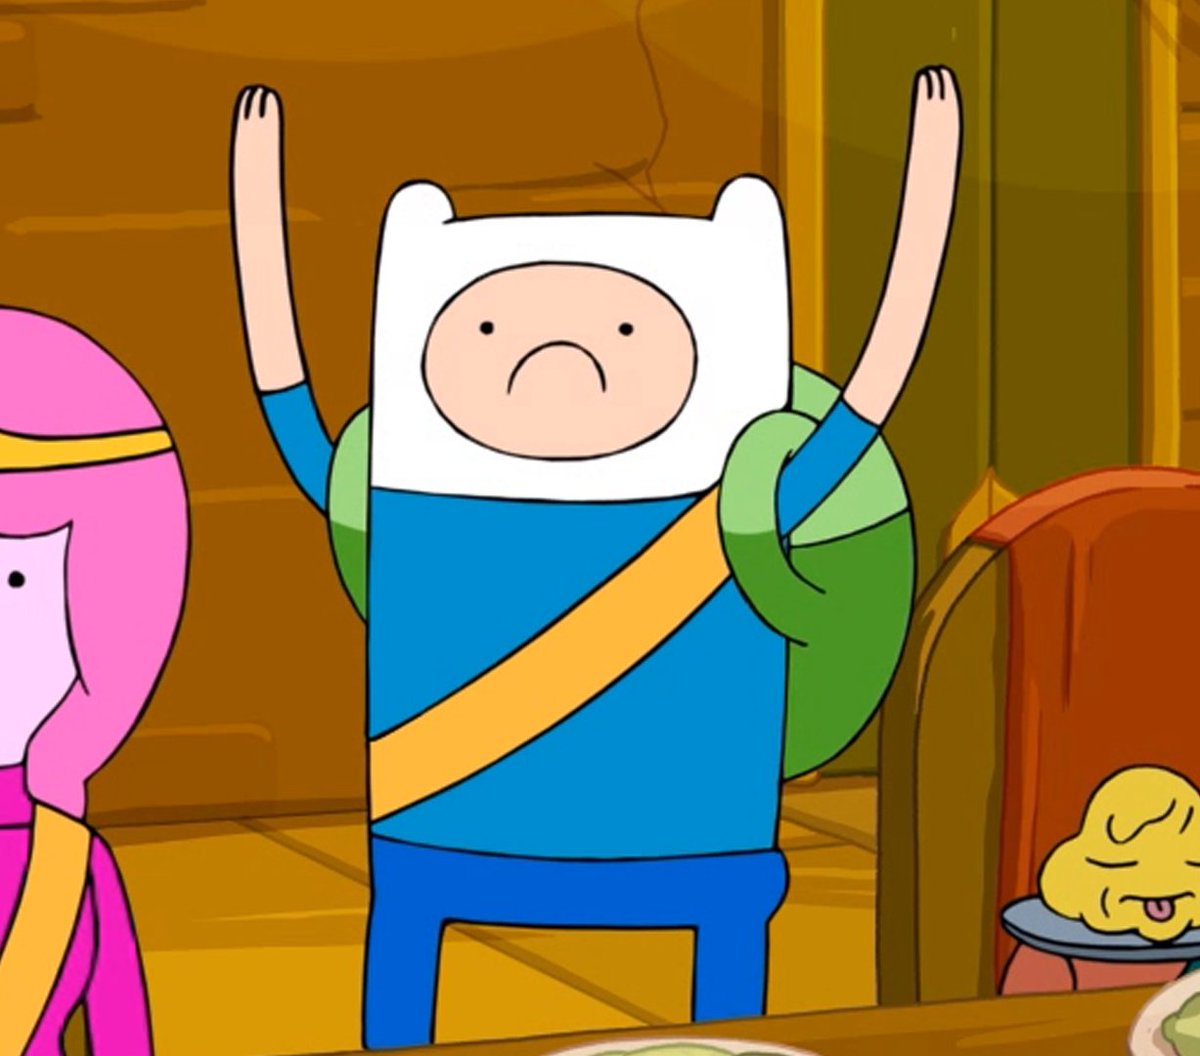 「i love it when finn goes :C」|adventure time momentsのイラスト